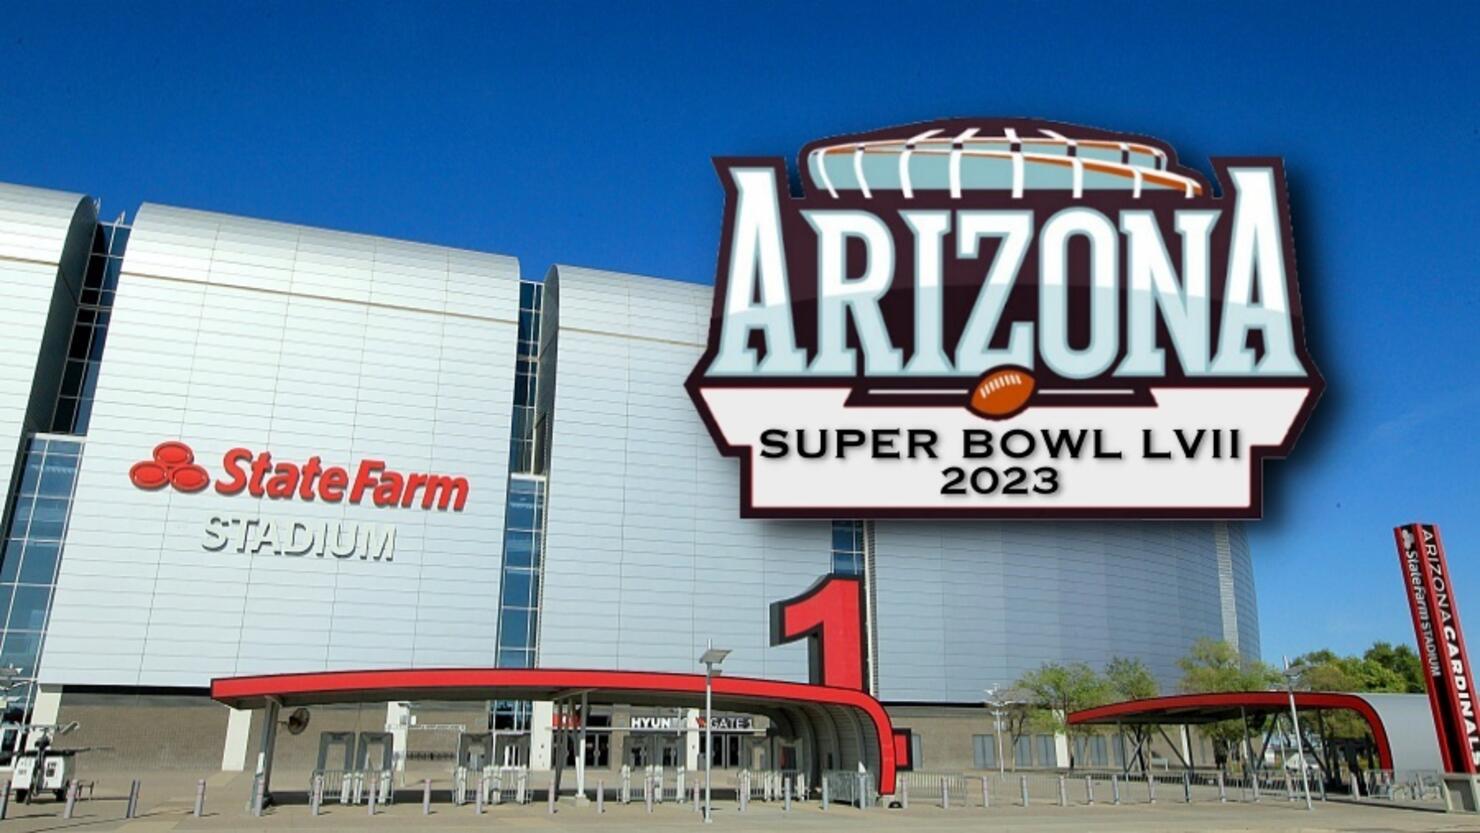 The 2023 Super Bowl Will Be Played At State Farm Stadium In Arizona ...